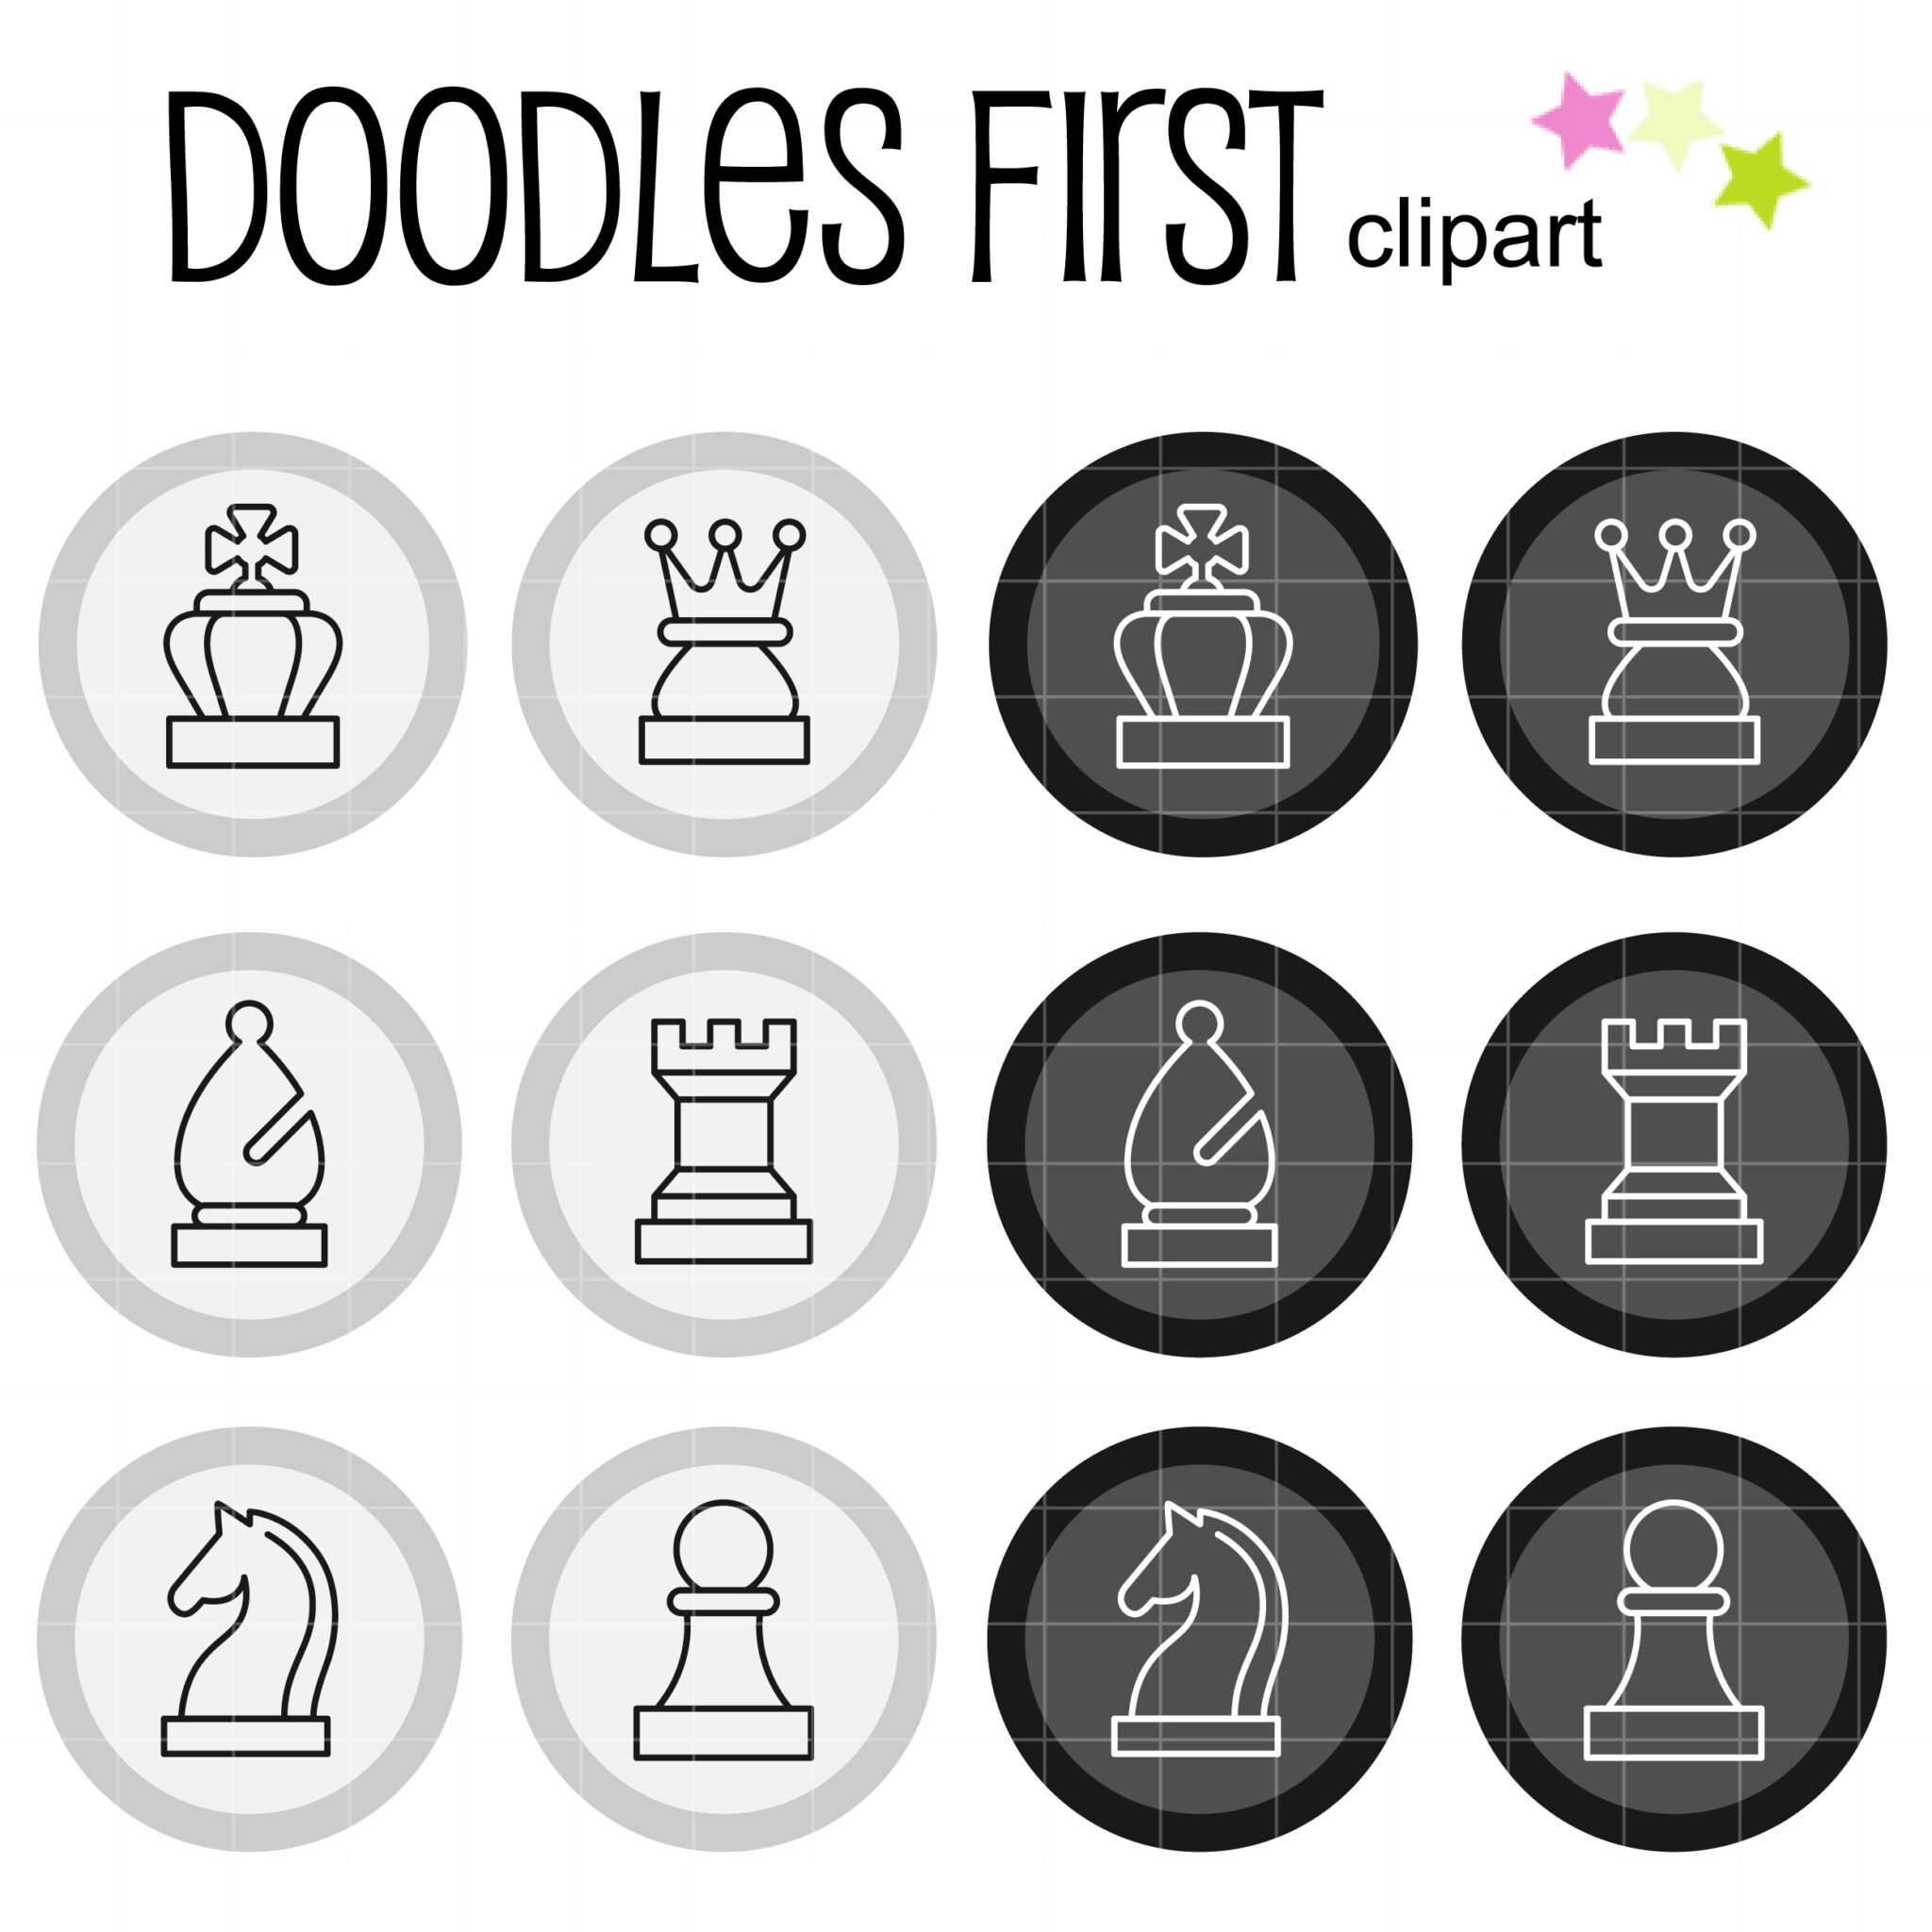 Chess SVG, Chess Pieces, Chess Pieces SVG Files, High Qualit